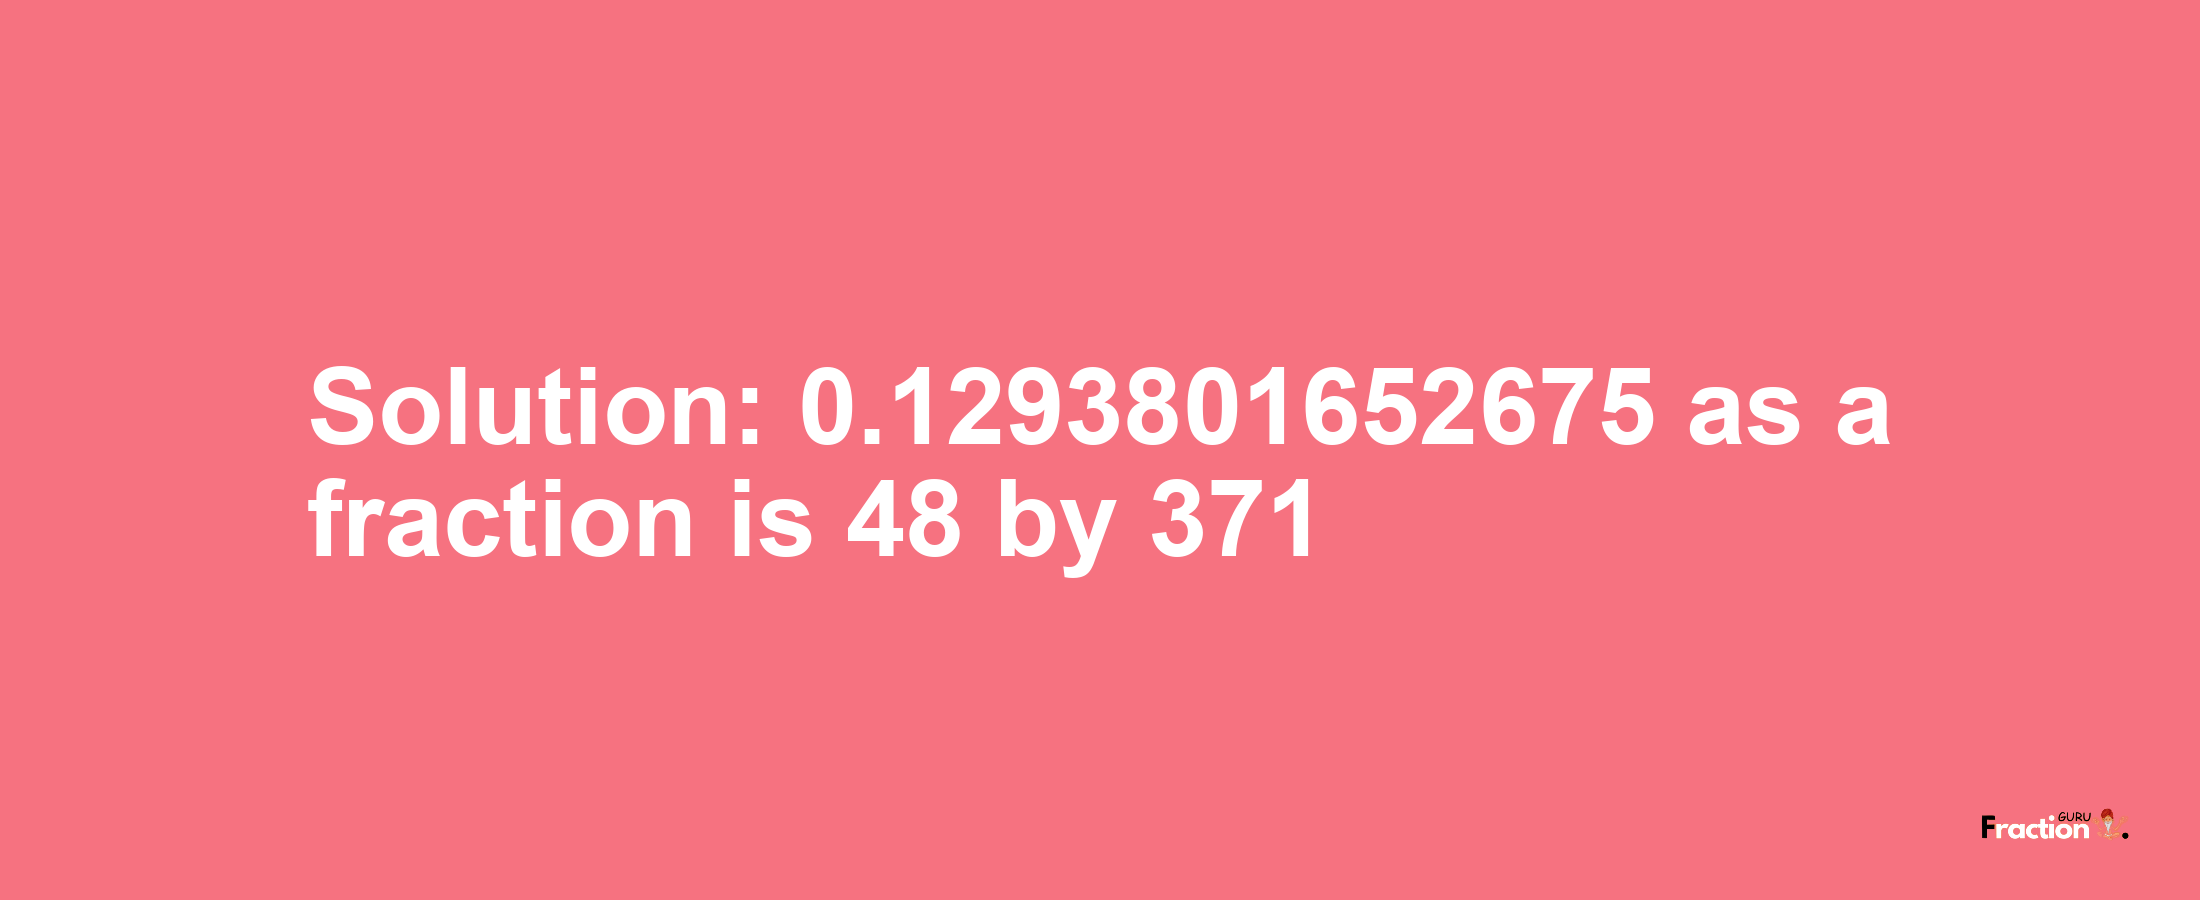 Solution:0.1293801652675 as a fraction is 48/371